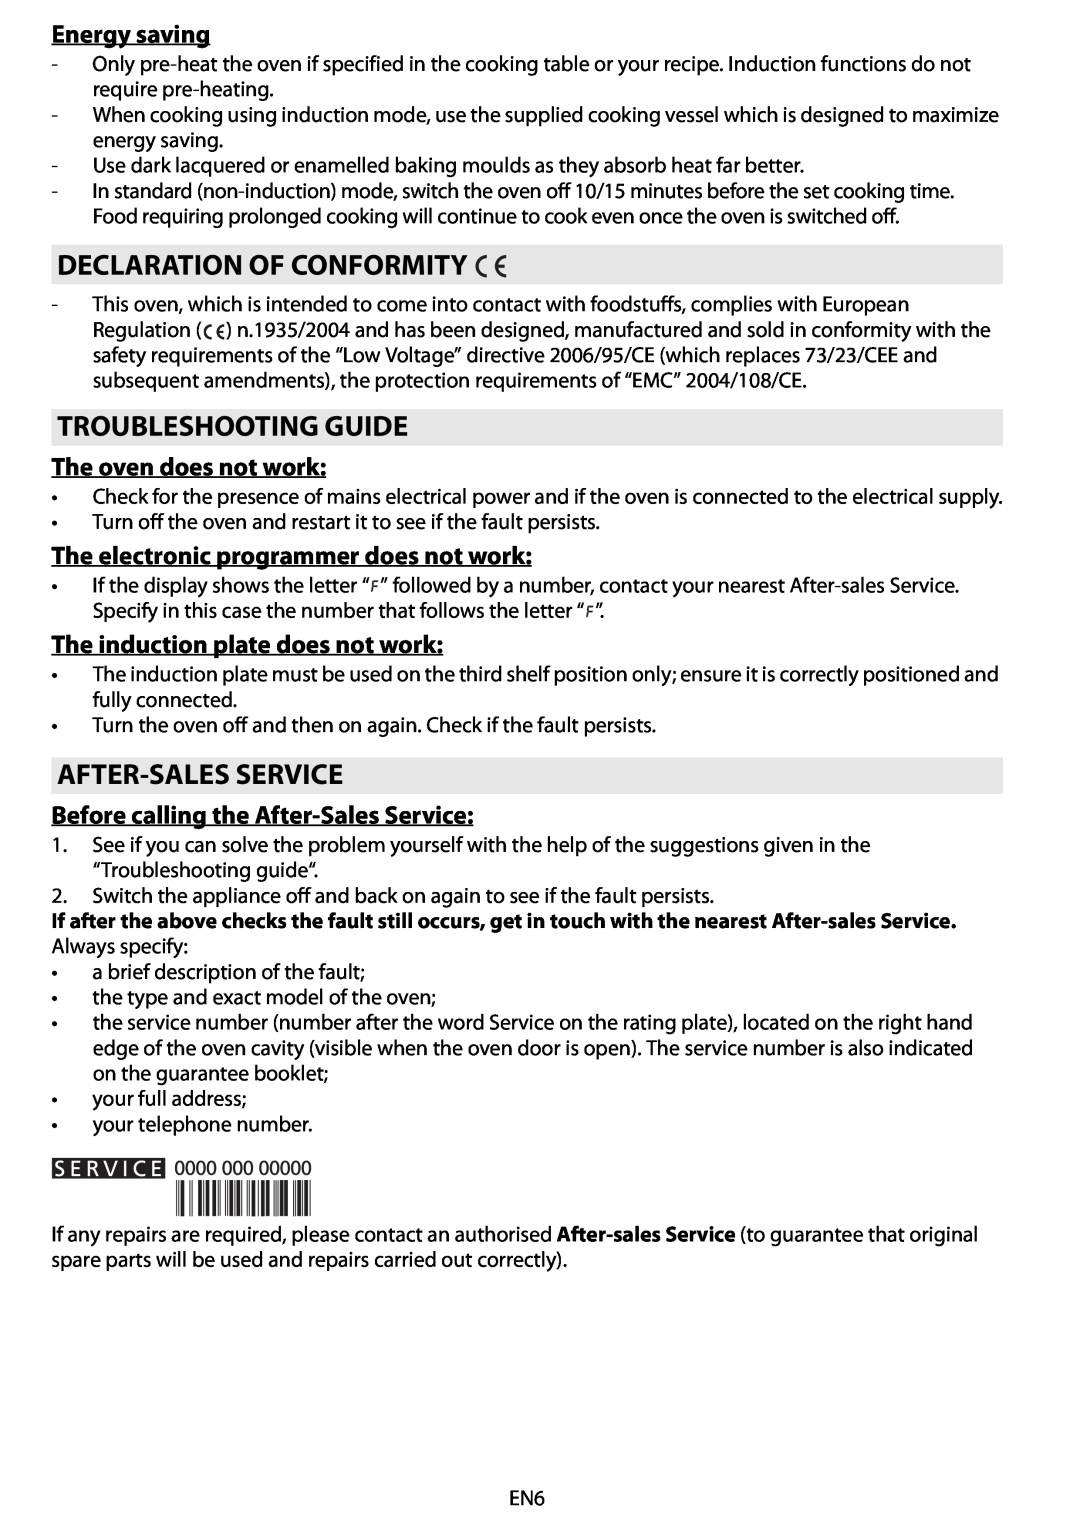 Whirlpool 8910 manual do utilizador Declaration Of Conformity, Troubleshooting Guide, After-Sales Service, Energy saving 